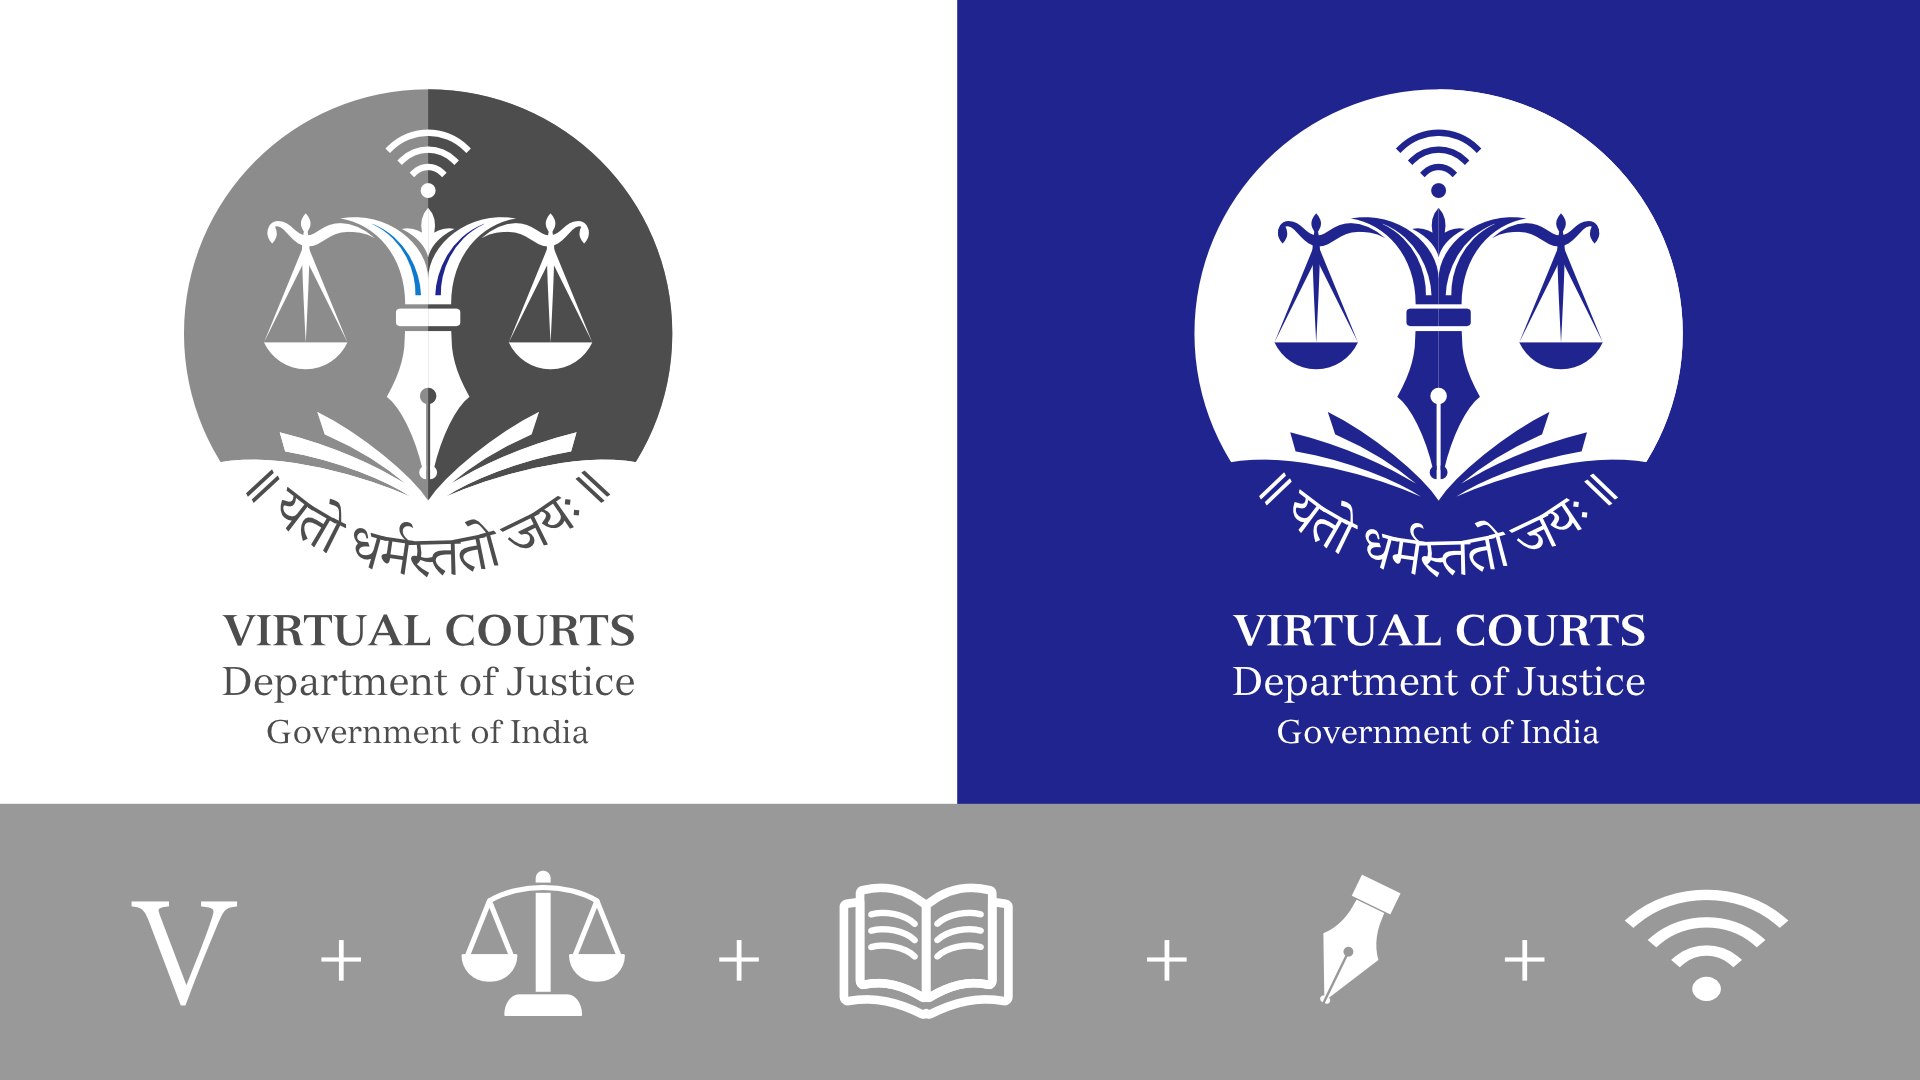 It is a combination of graphic elements like â€˜character Vâ€™+â€˜balanceâ€™+â€™penâ€™+ â€˜bookâ€™+Network symbol. The strokes of alphabet â€˜Vâ€™ are extended  to form the arms of â€˜Scale of Justiceâ€™ represents impartiality.